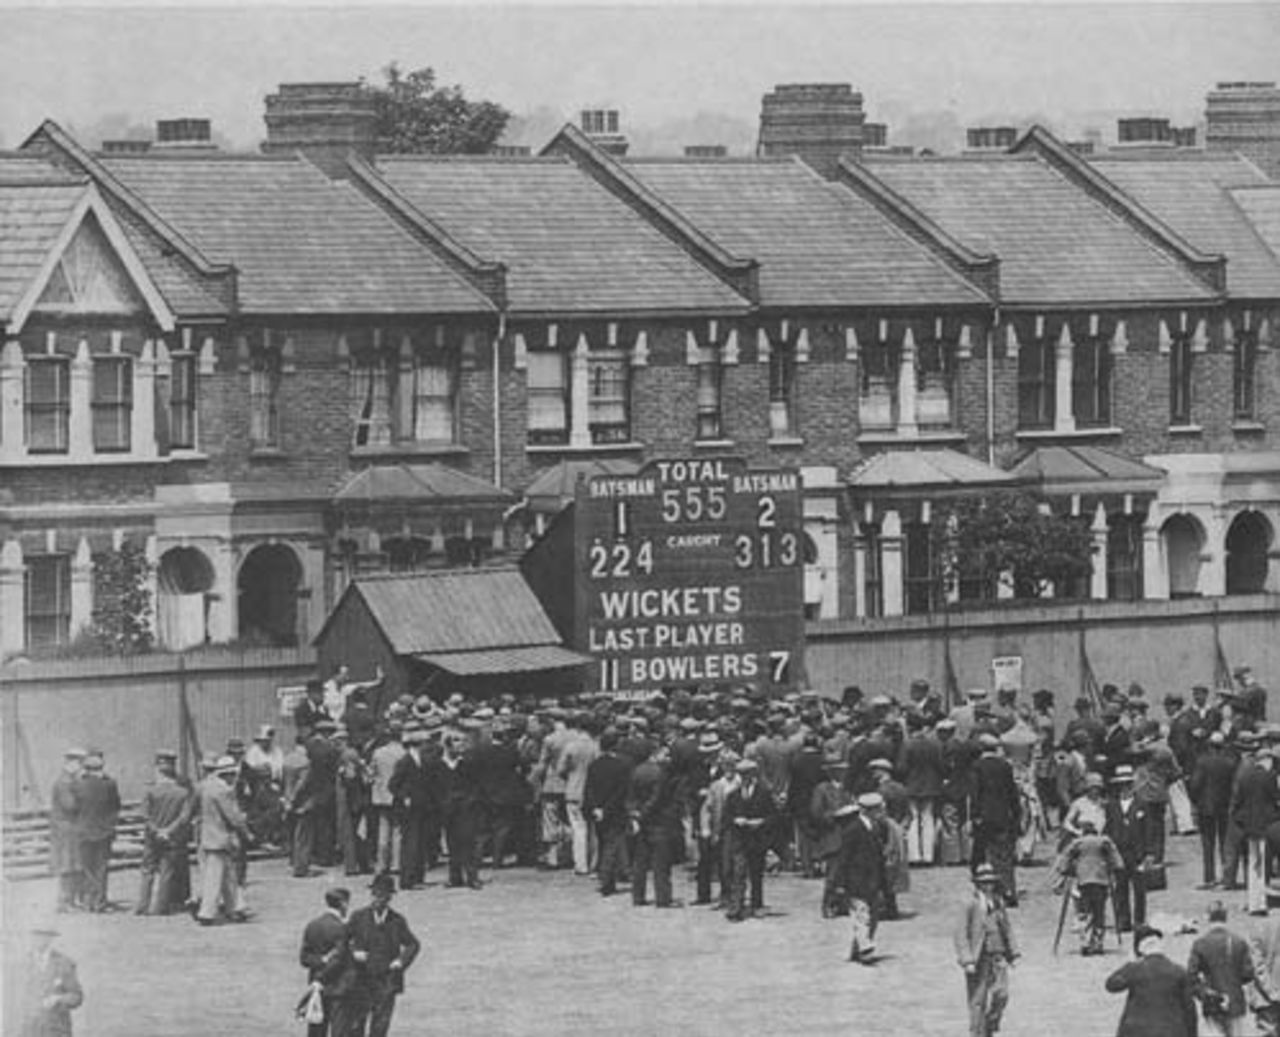 Crowds surround the scorebox after Percy Holmes and Herbert Sutcliffe's  555 first-wicket stand, Essex v Yorkshire, Leyton, June 16, 1932